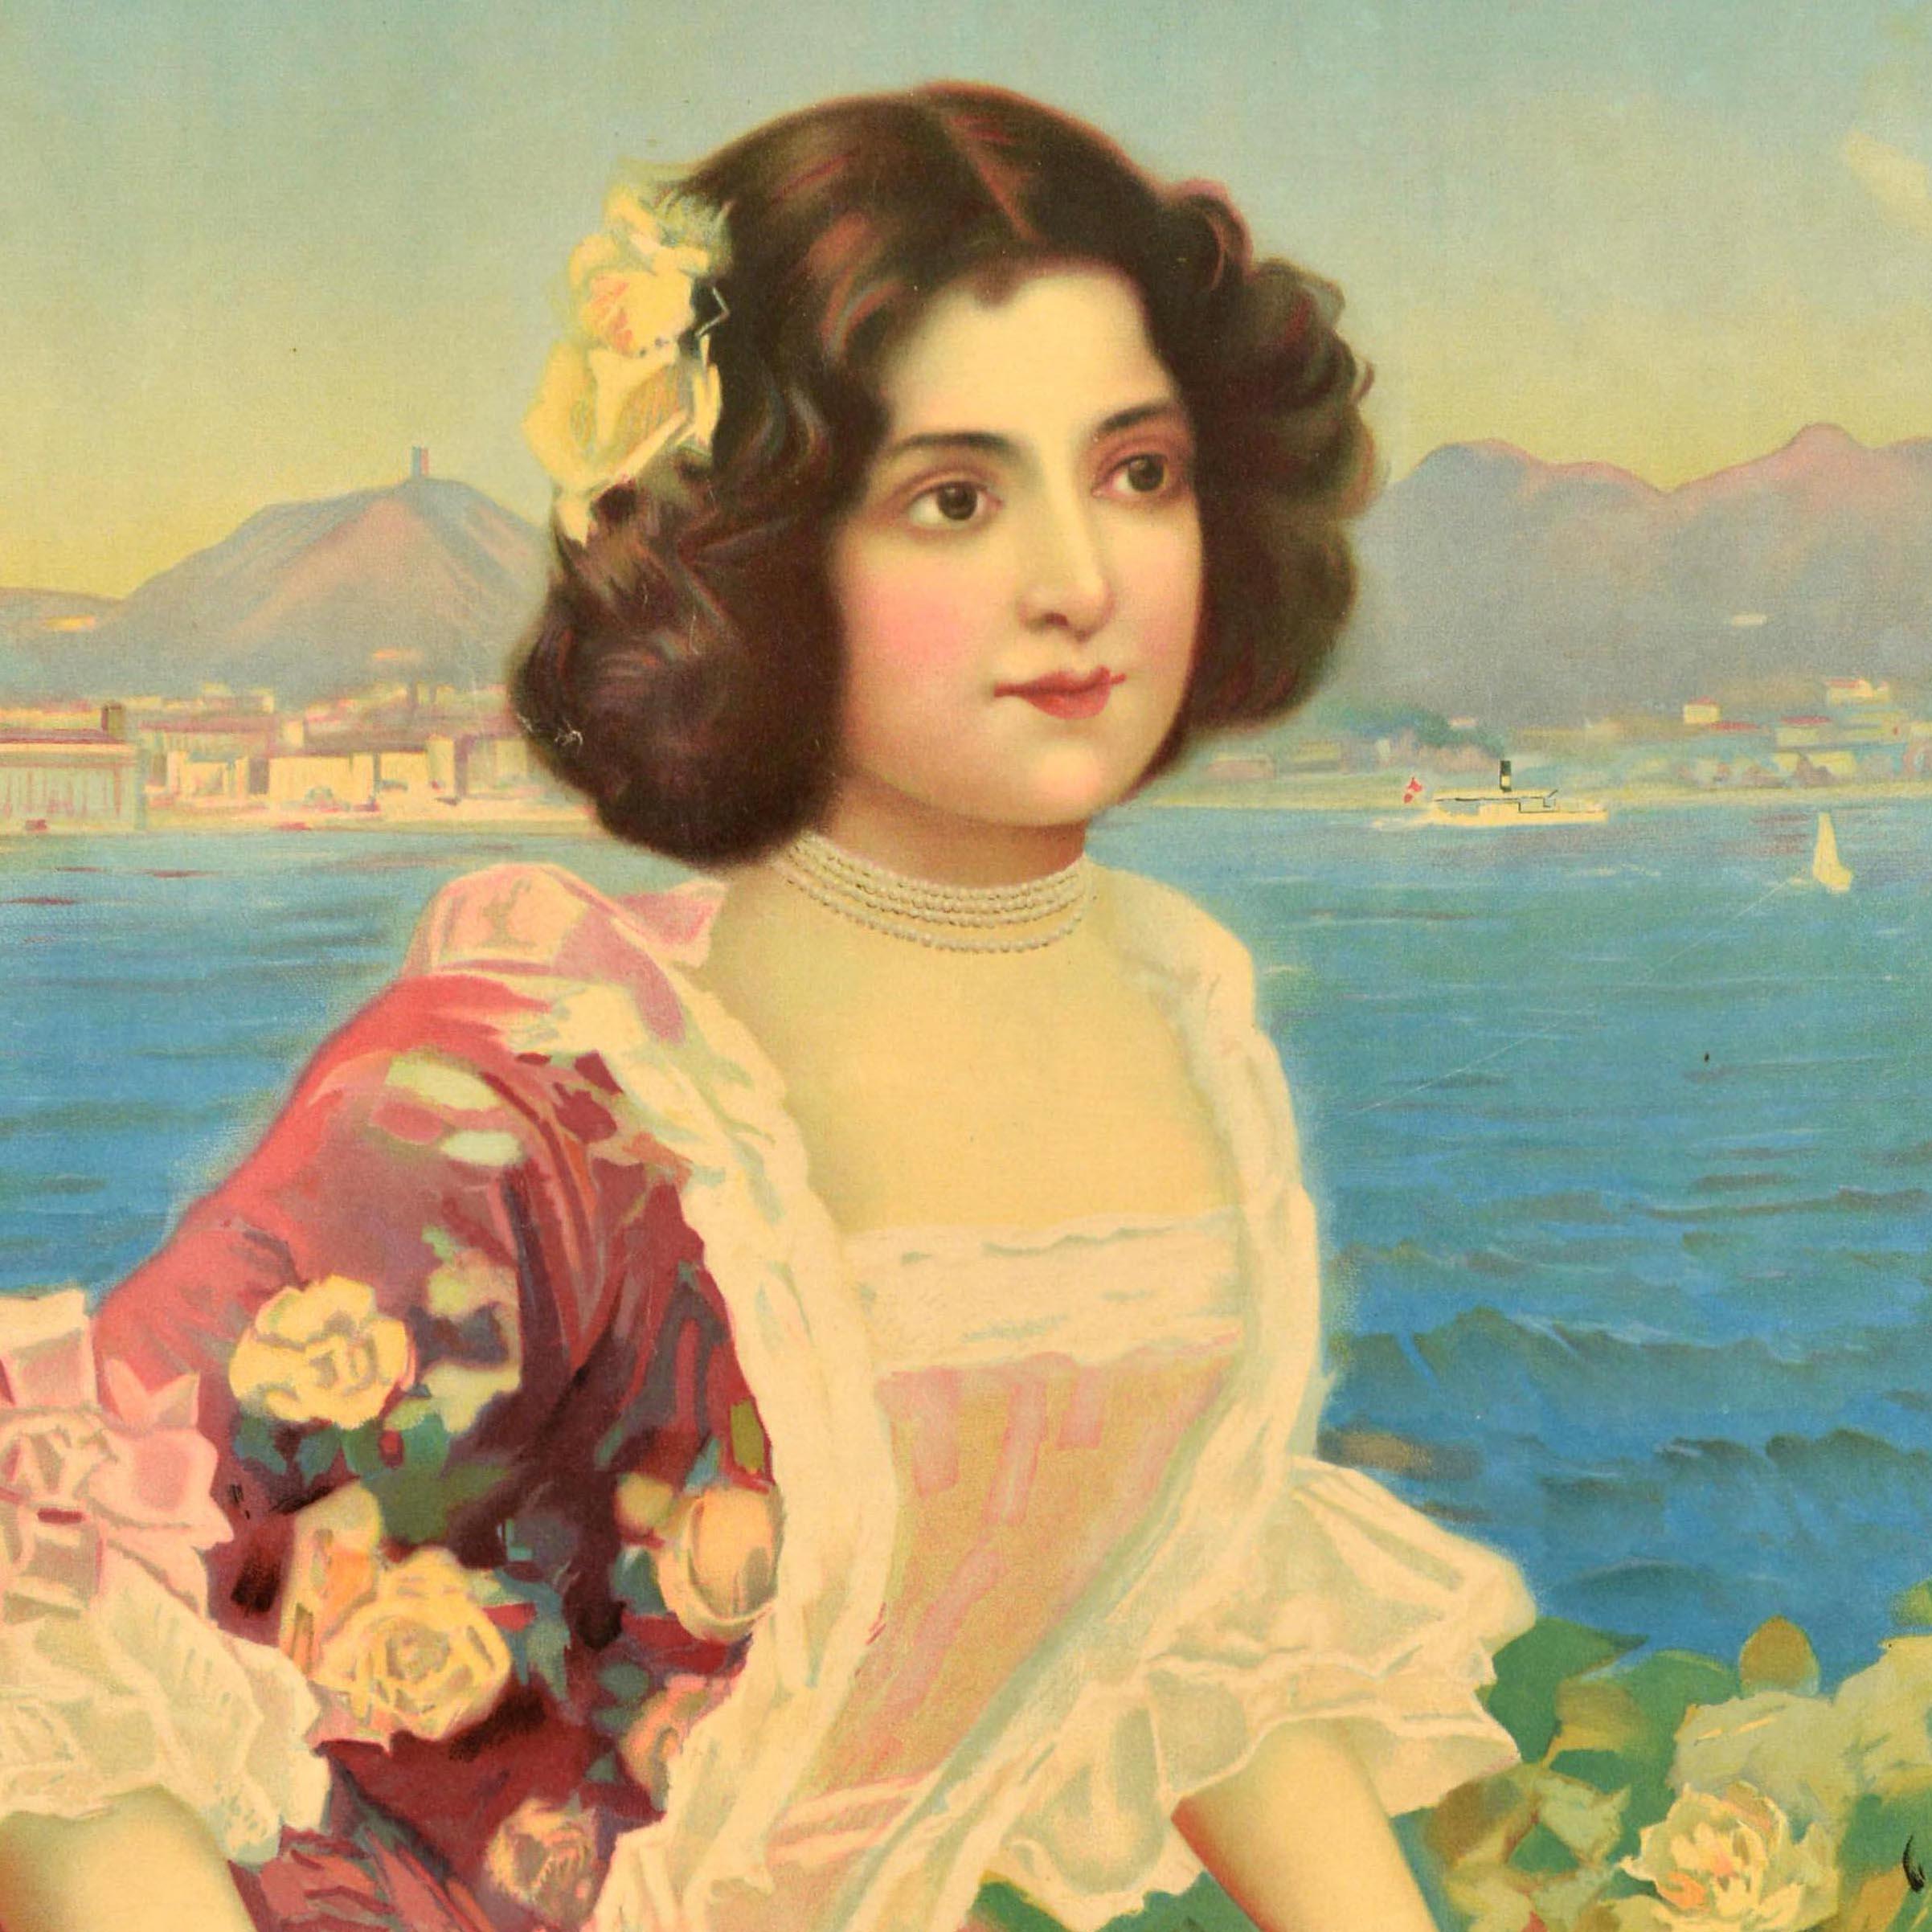 Original antique travel poster for Lago di Como featuring elegant Belle Epoque artwork depicting a lady in a floral pink rose dress with a flower in her hair standing at a decorative railing in front of sailing boats and steamers on Lake Como with